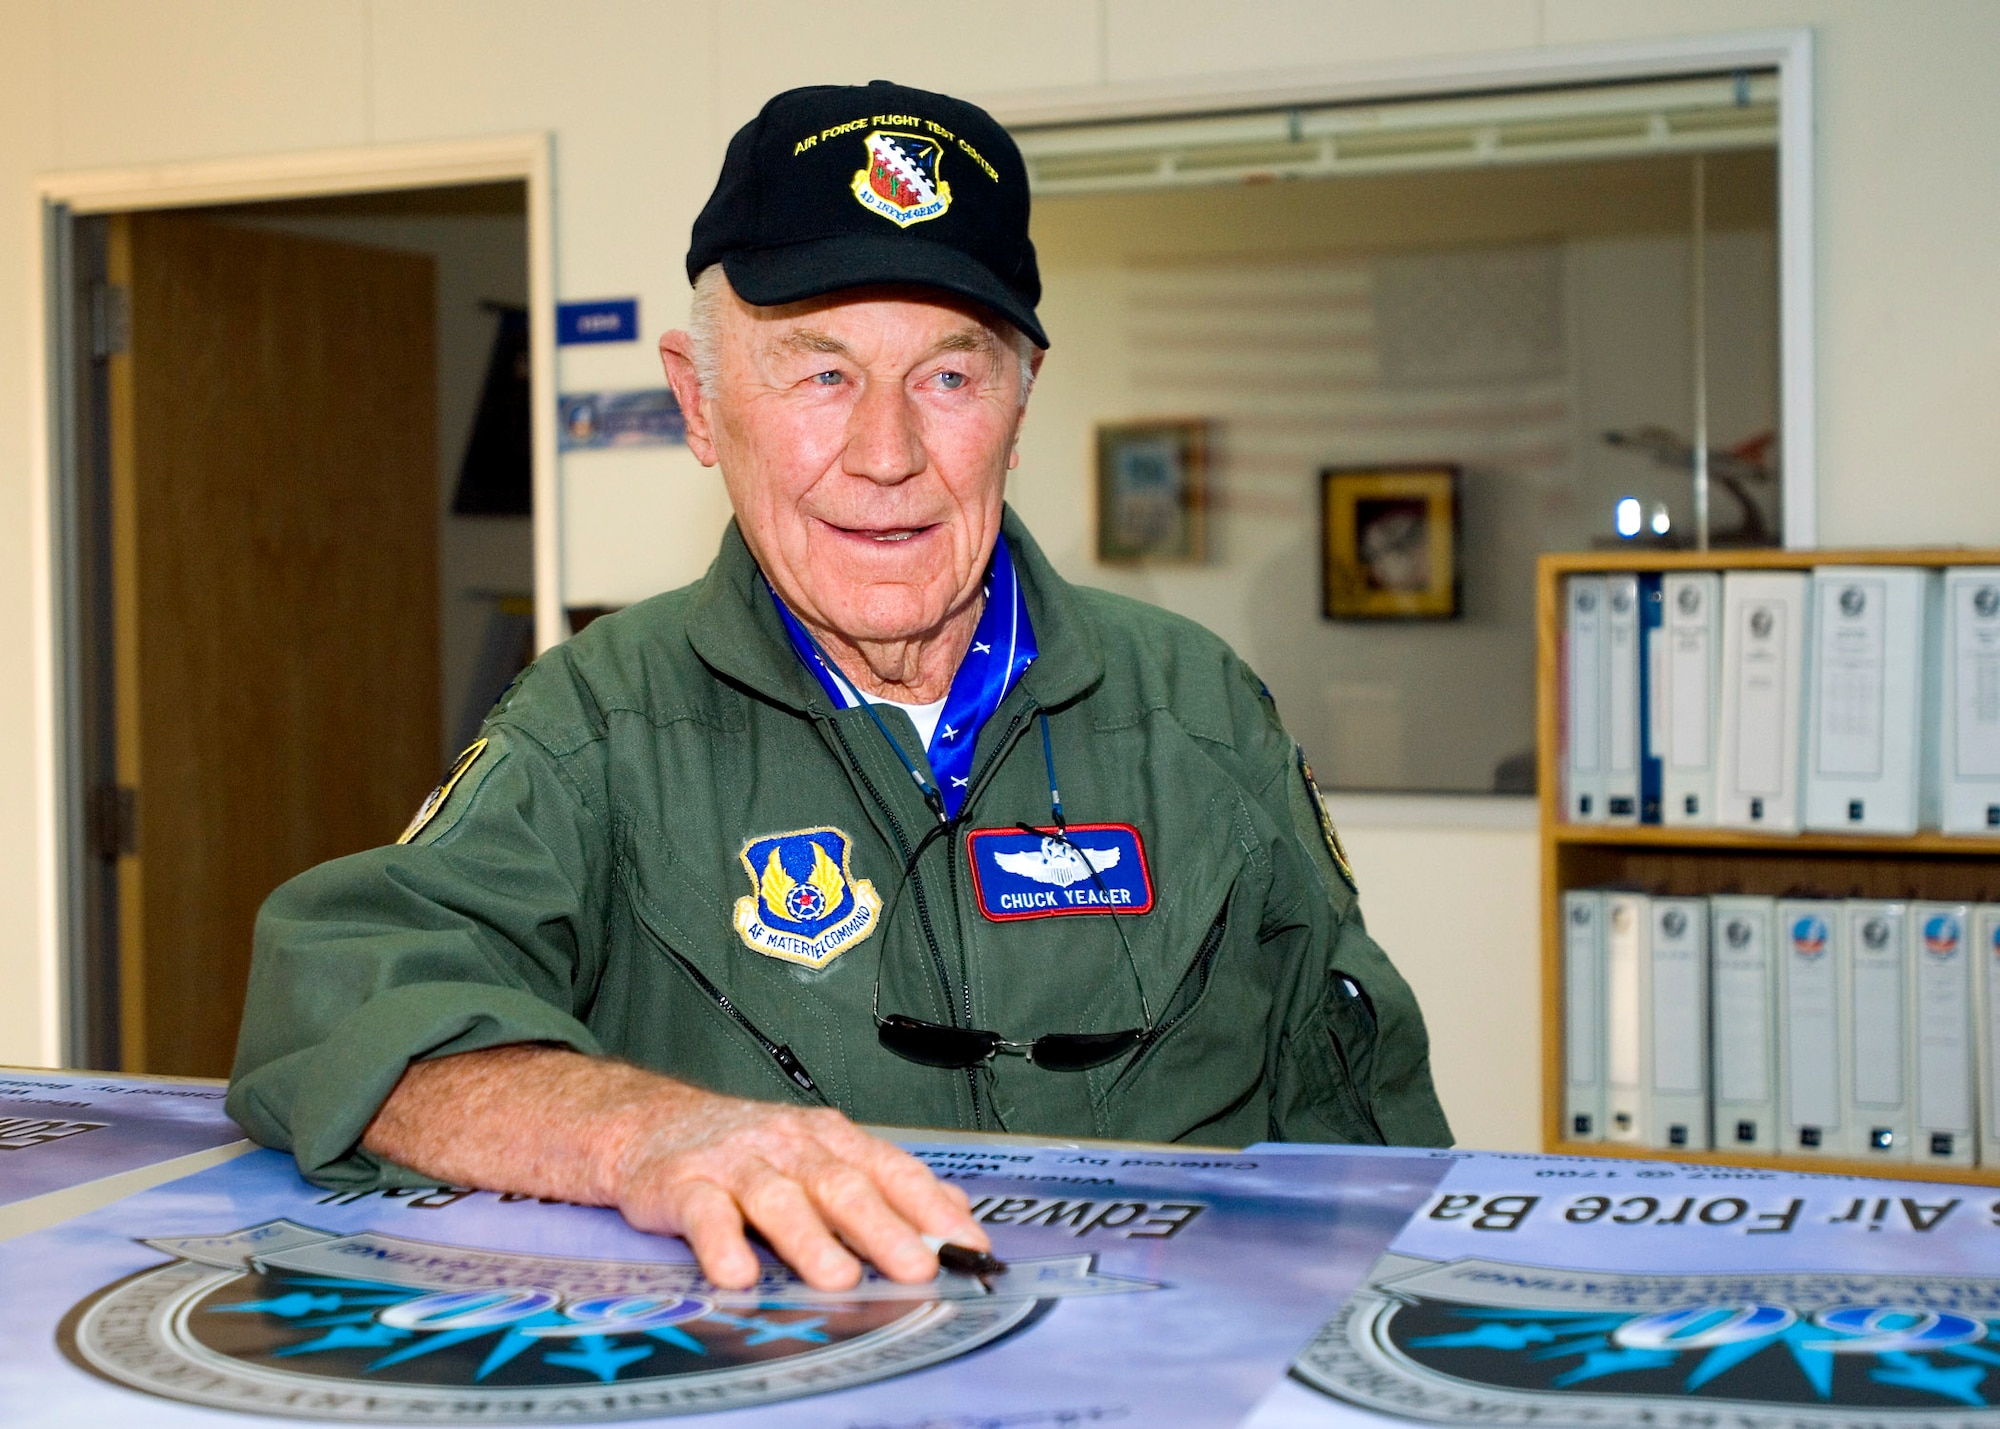 Retired Brig. Gen. Chuck Yeager pauses for a moment while autographing several posters at Edwards Air Force Base, Calif. General Yeager became the first man to fly faster than the speed of sound in level flight on October 14, 1947. (U.S. Air Force photo/Mike Cassidy)